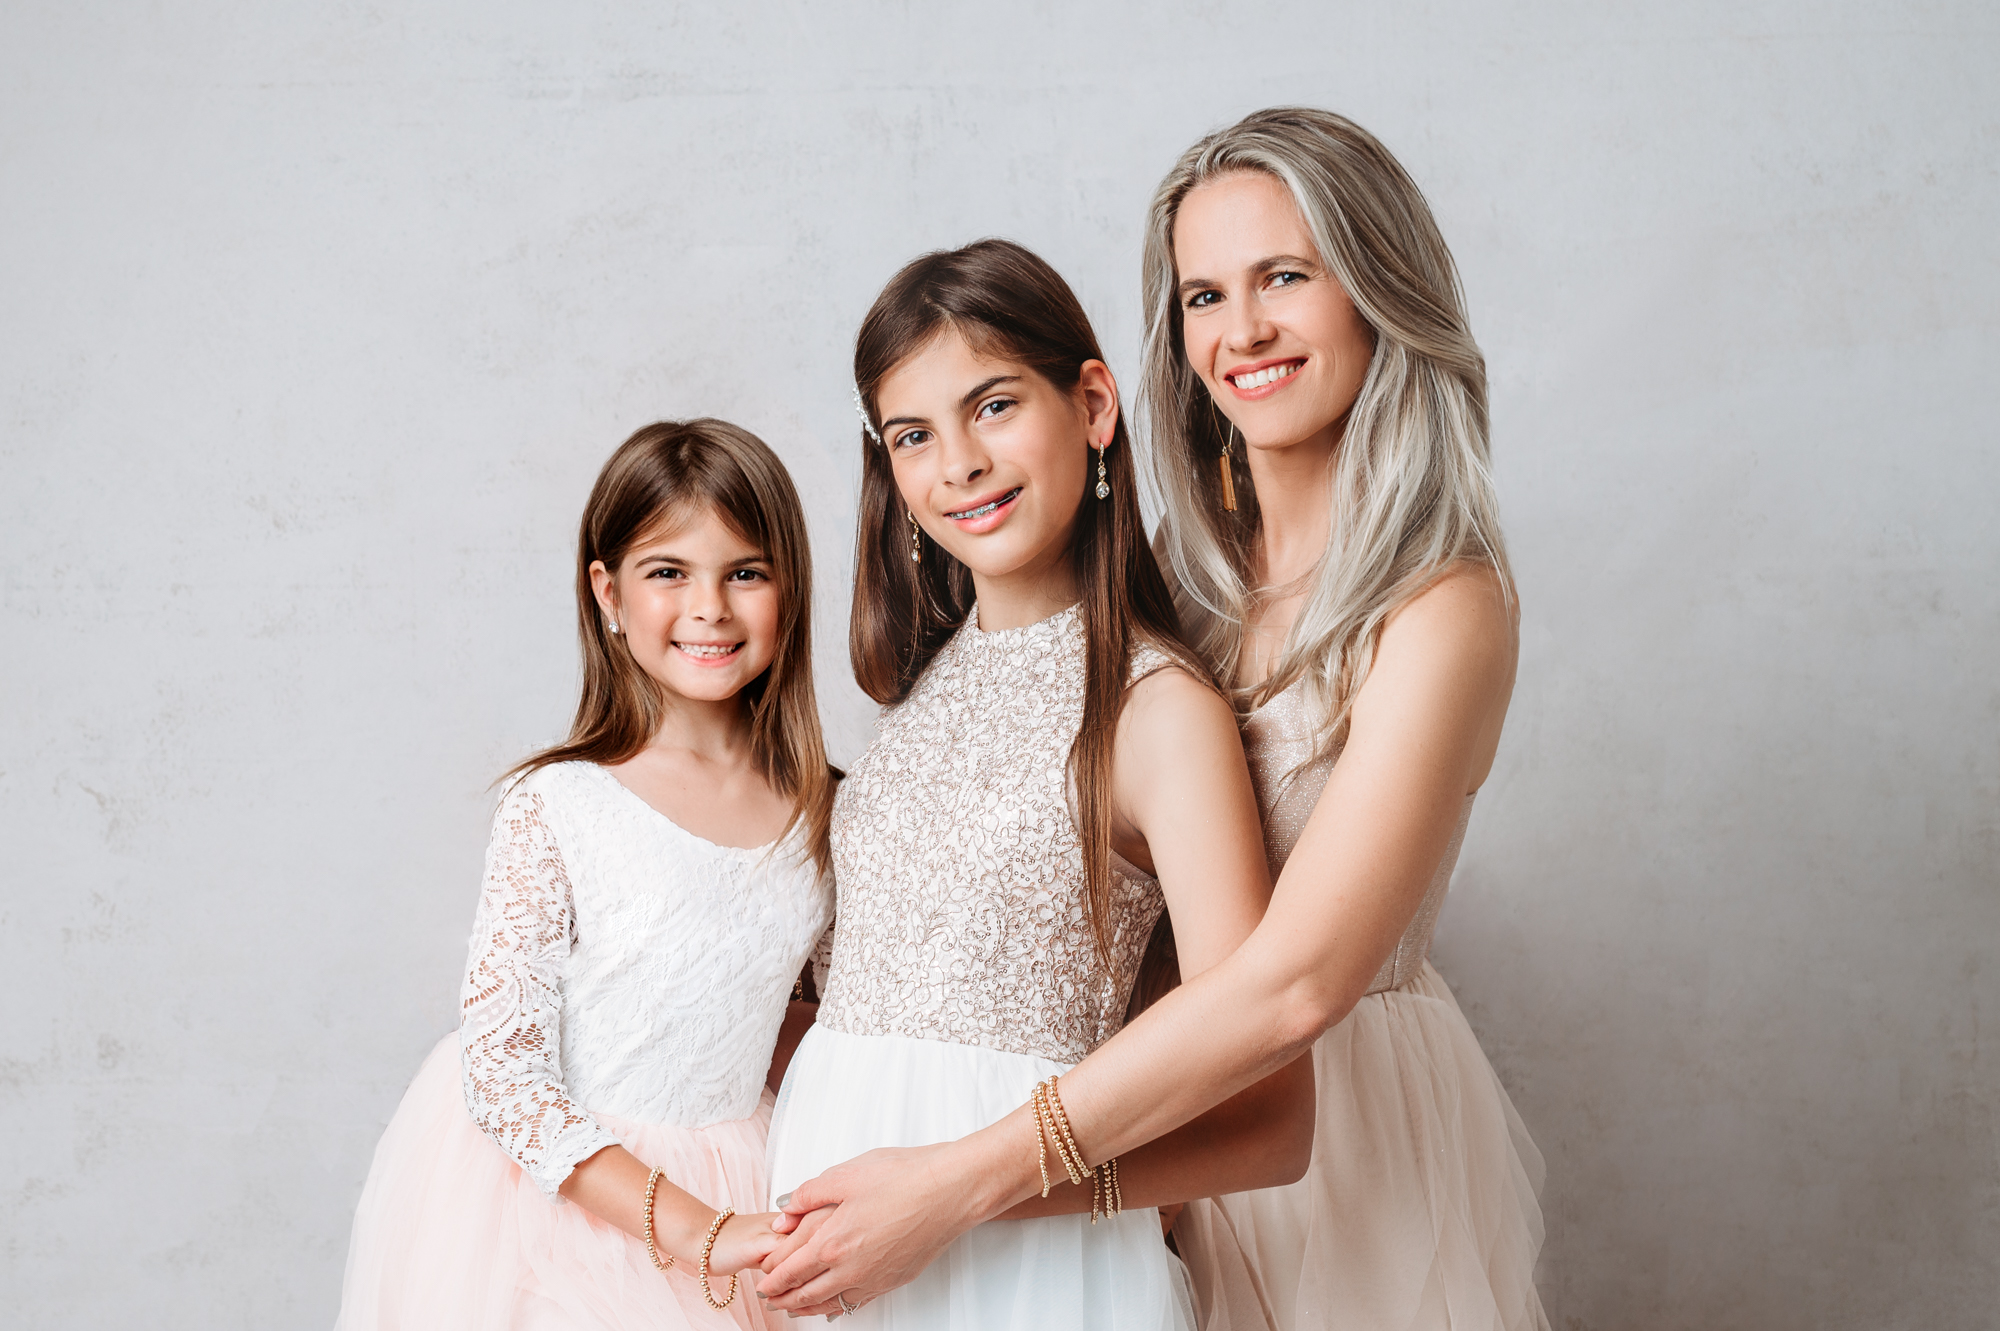 beautiful portrait of mom with two daughters in blush dresses posing for a photo.